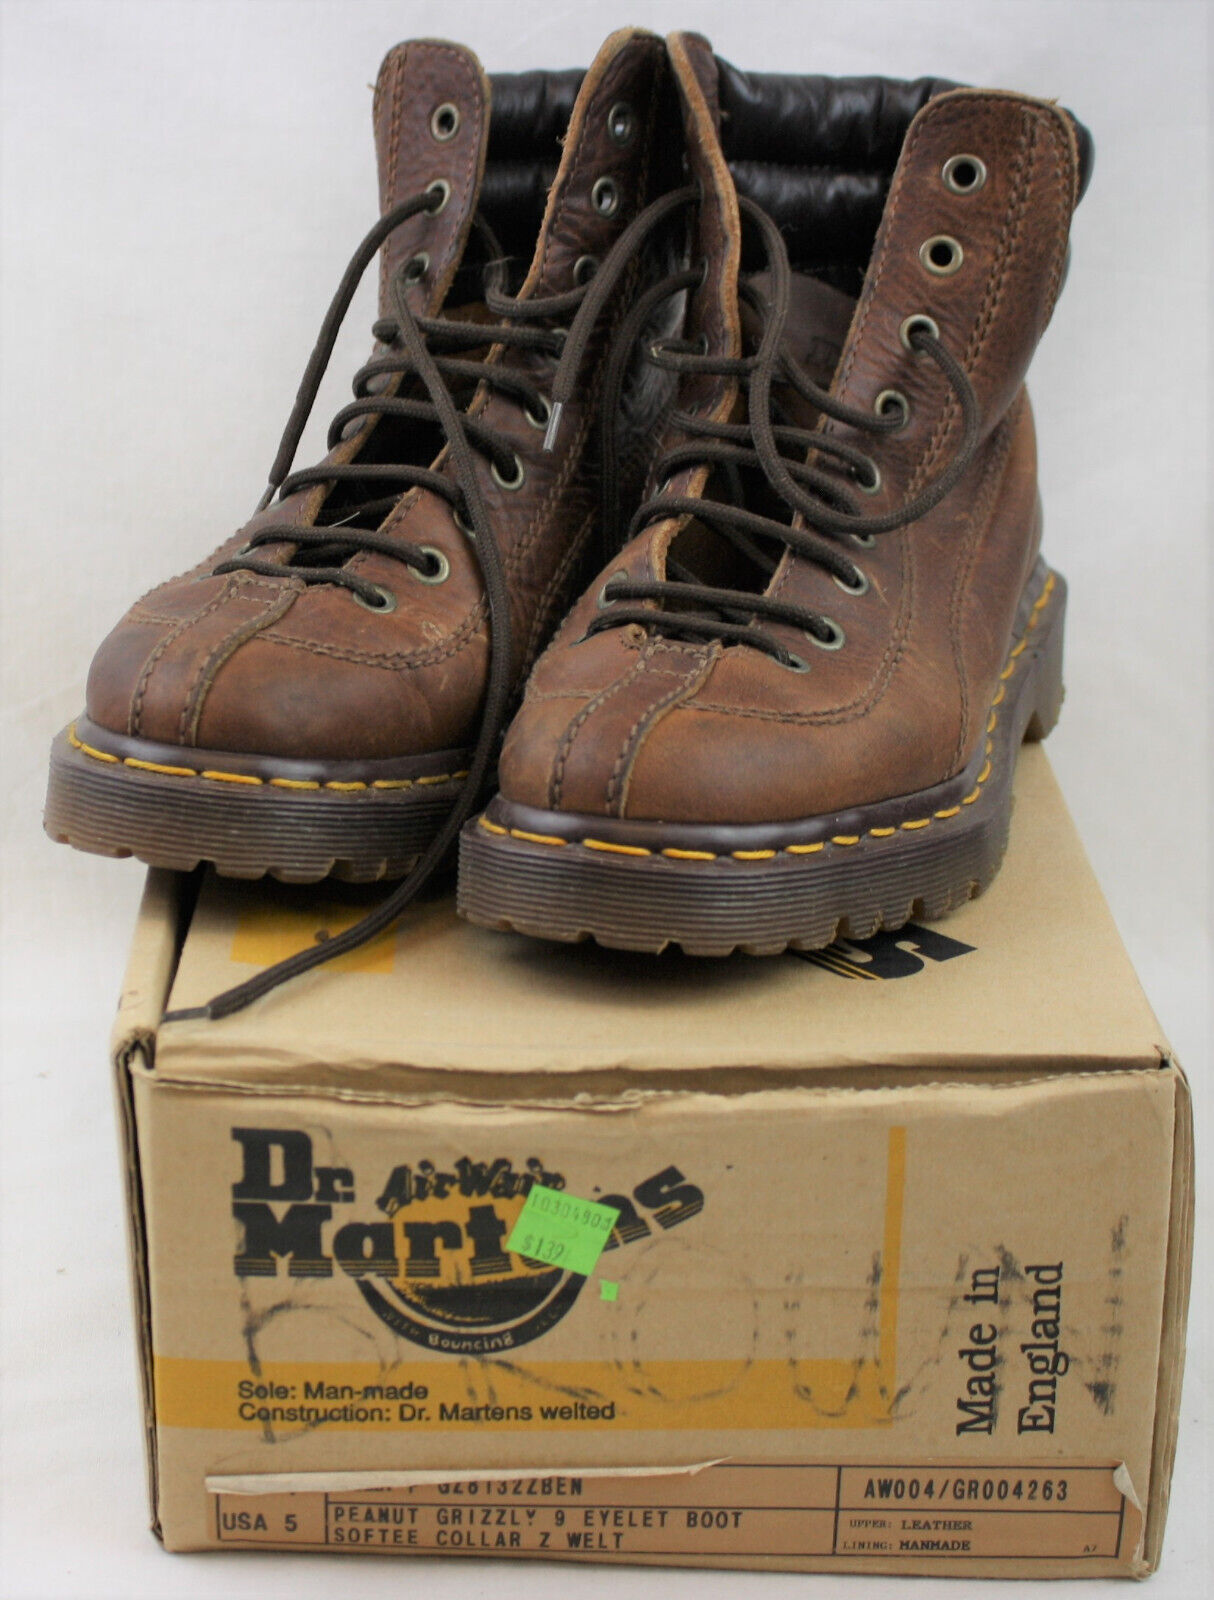 Dr Martens ~ Womens Size 5 Peanut Grizzly 9 Eyelet Boot Softee Collar  VINTAGE 95